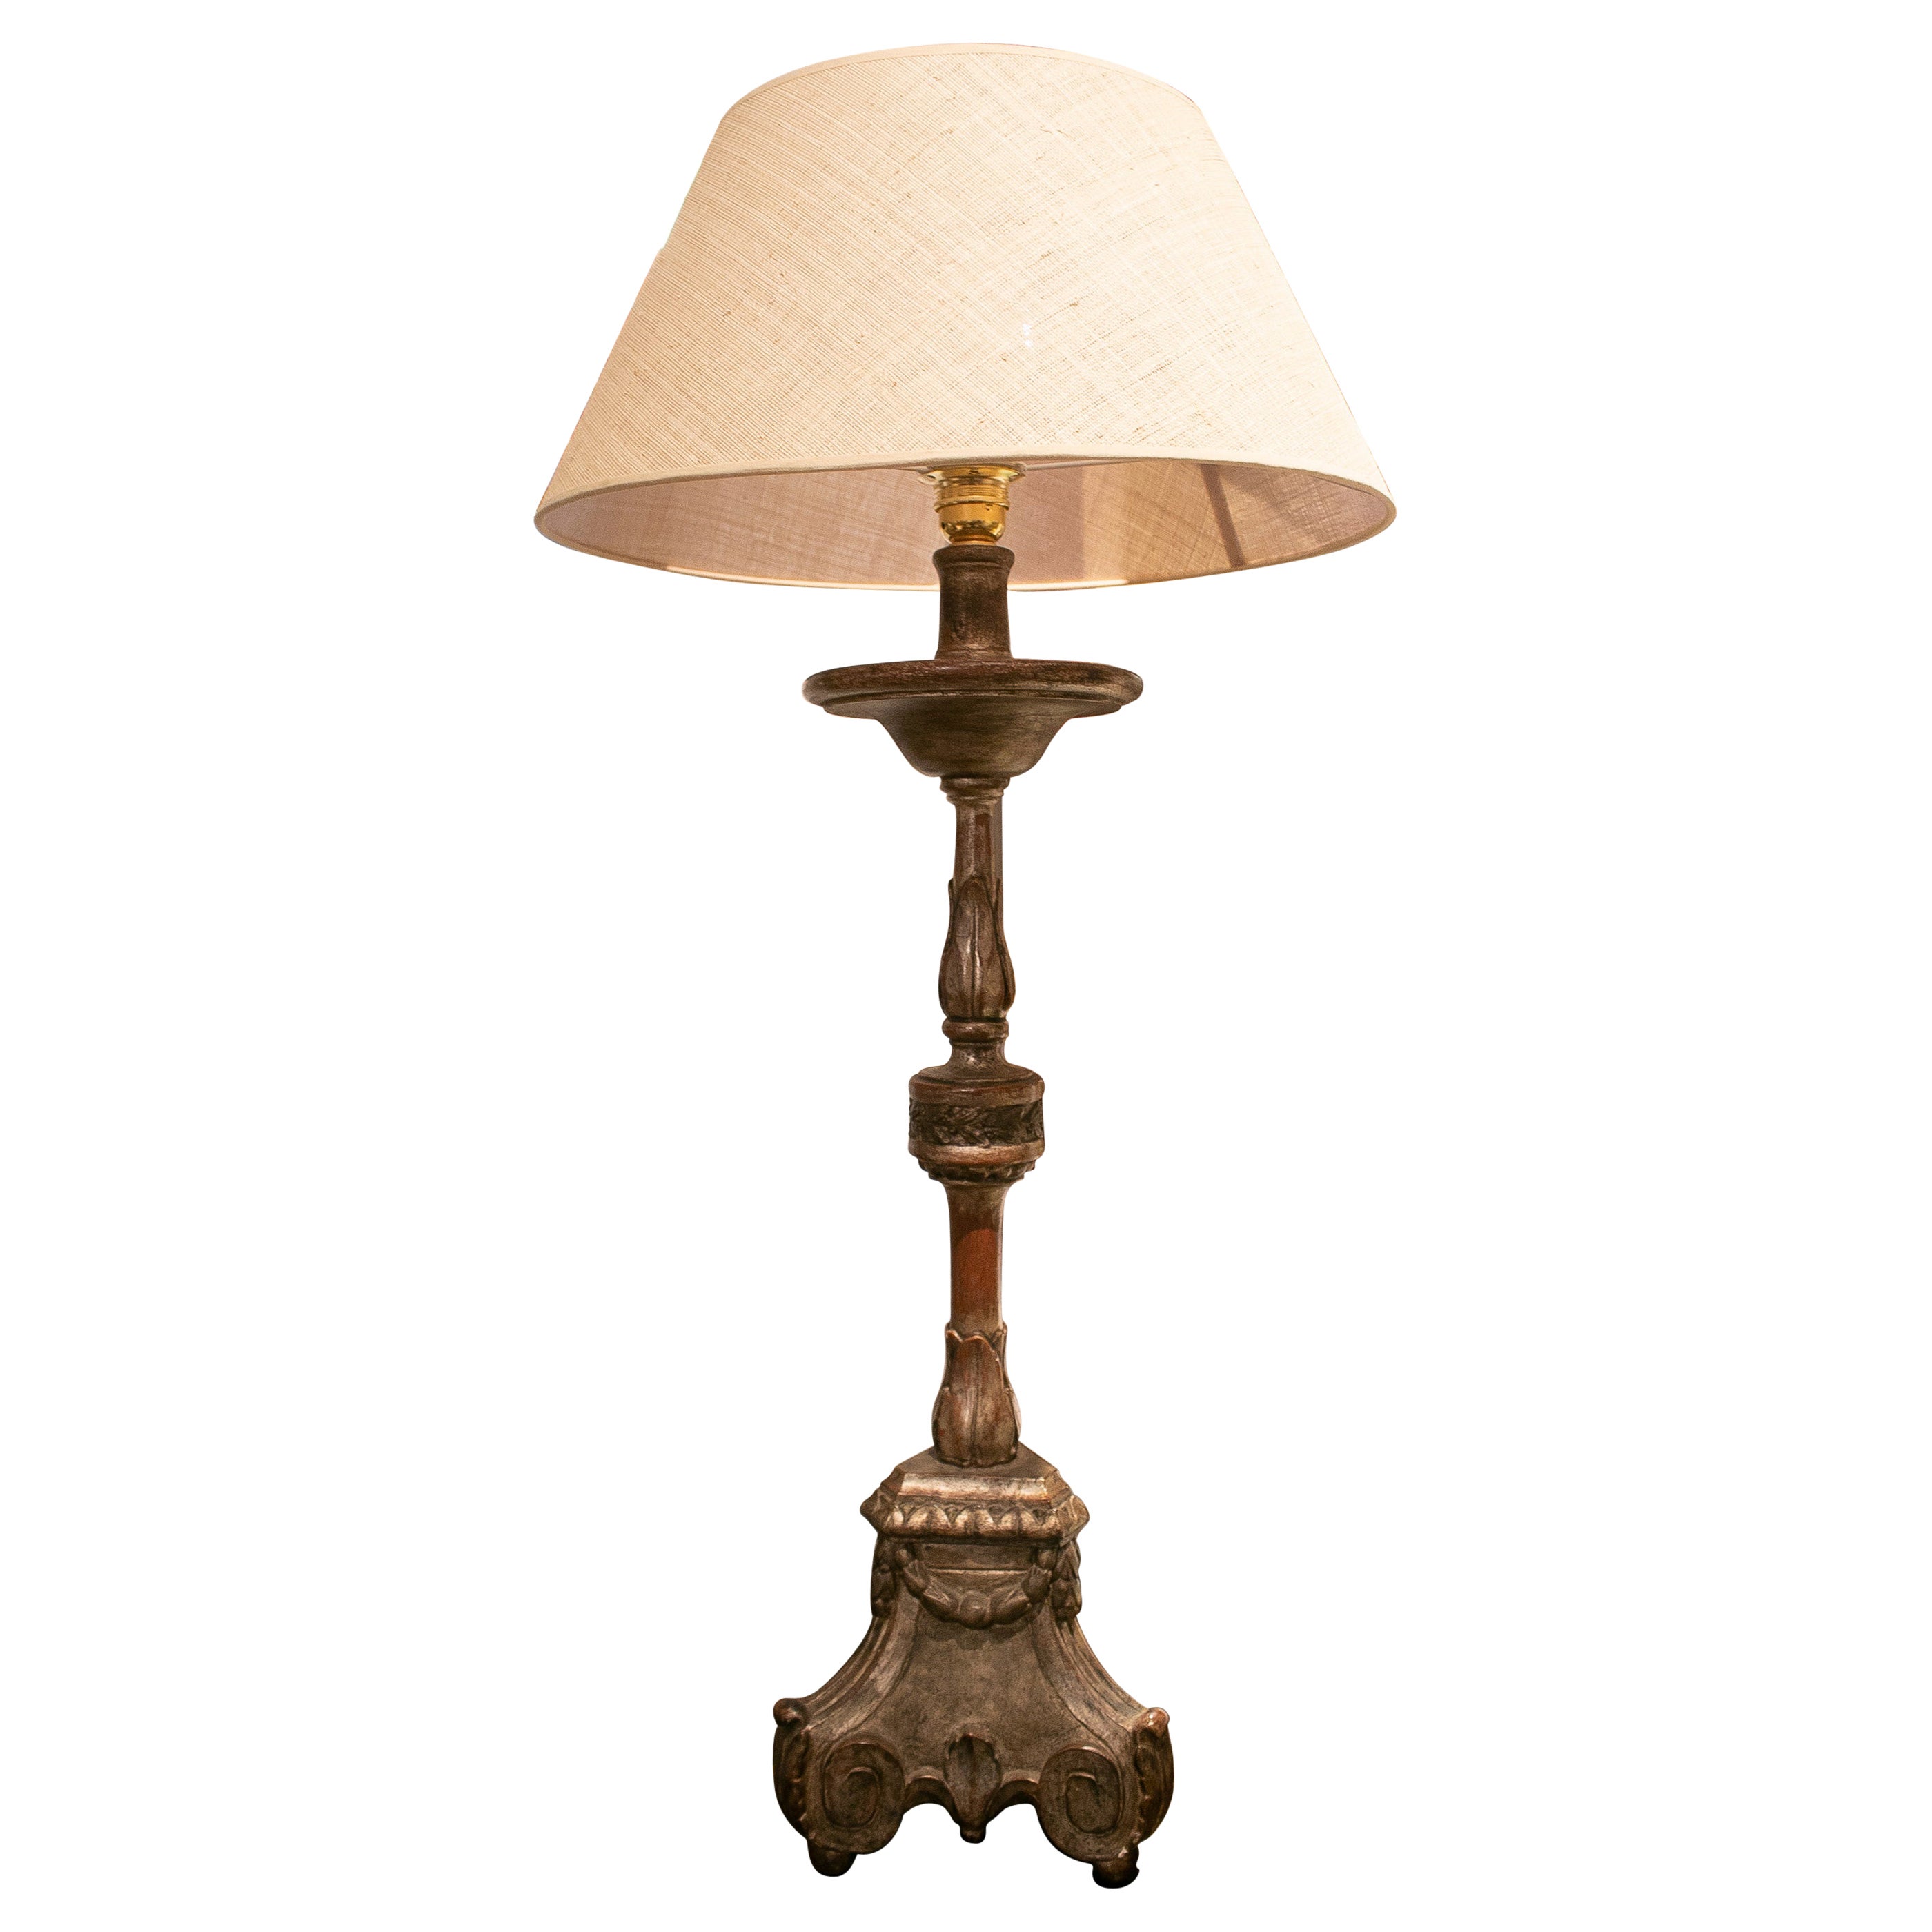 19th Century Spanish Giltwood Candlestick Turned Table Lamp